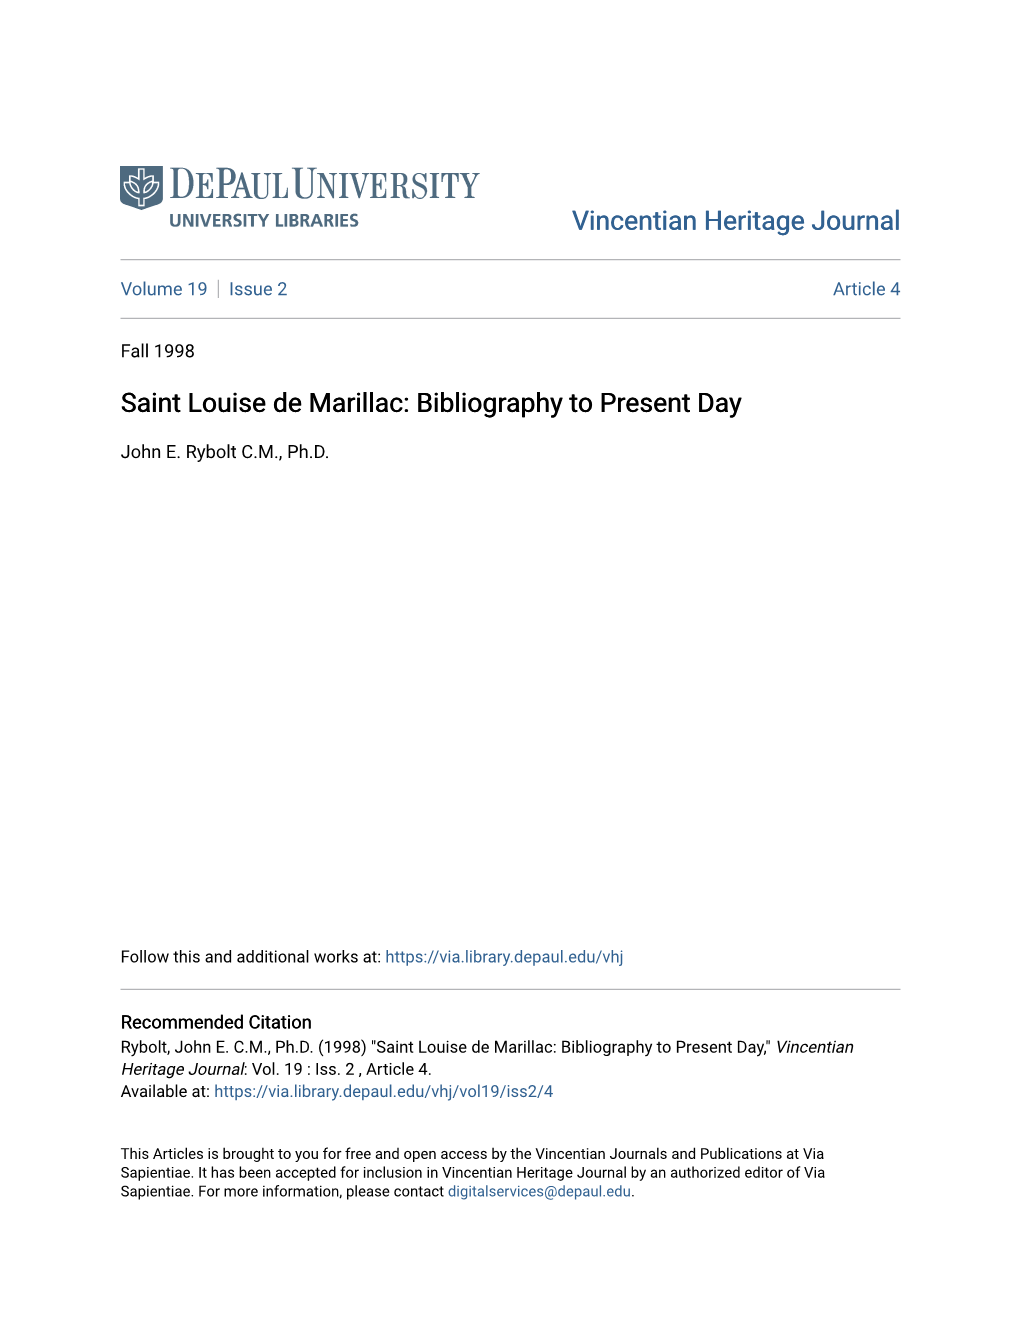 Saint Louise De Marillac: Bibliography to Present Day